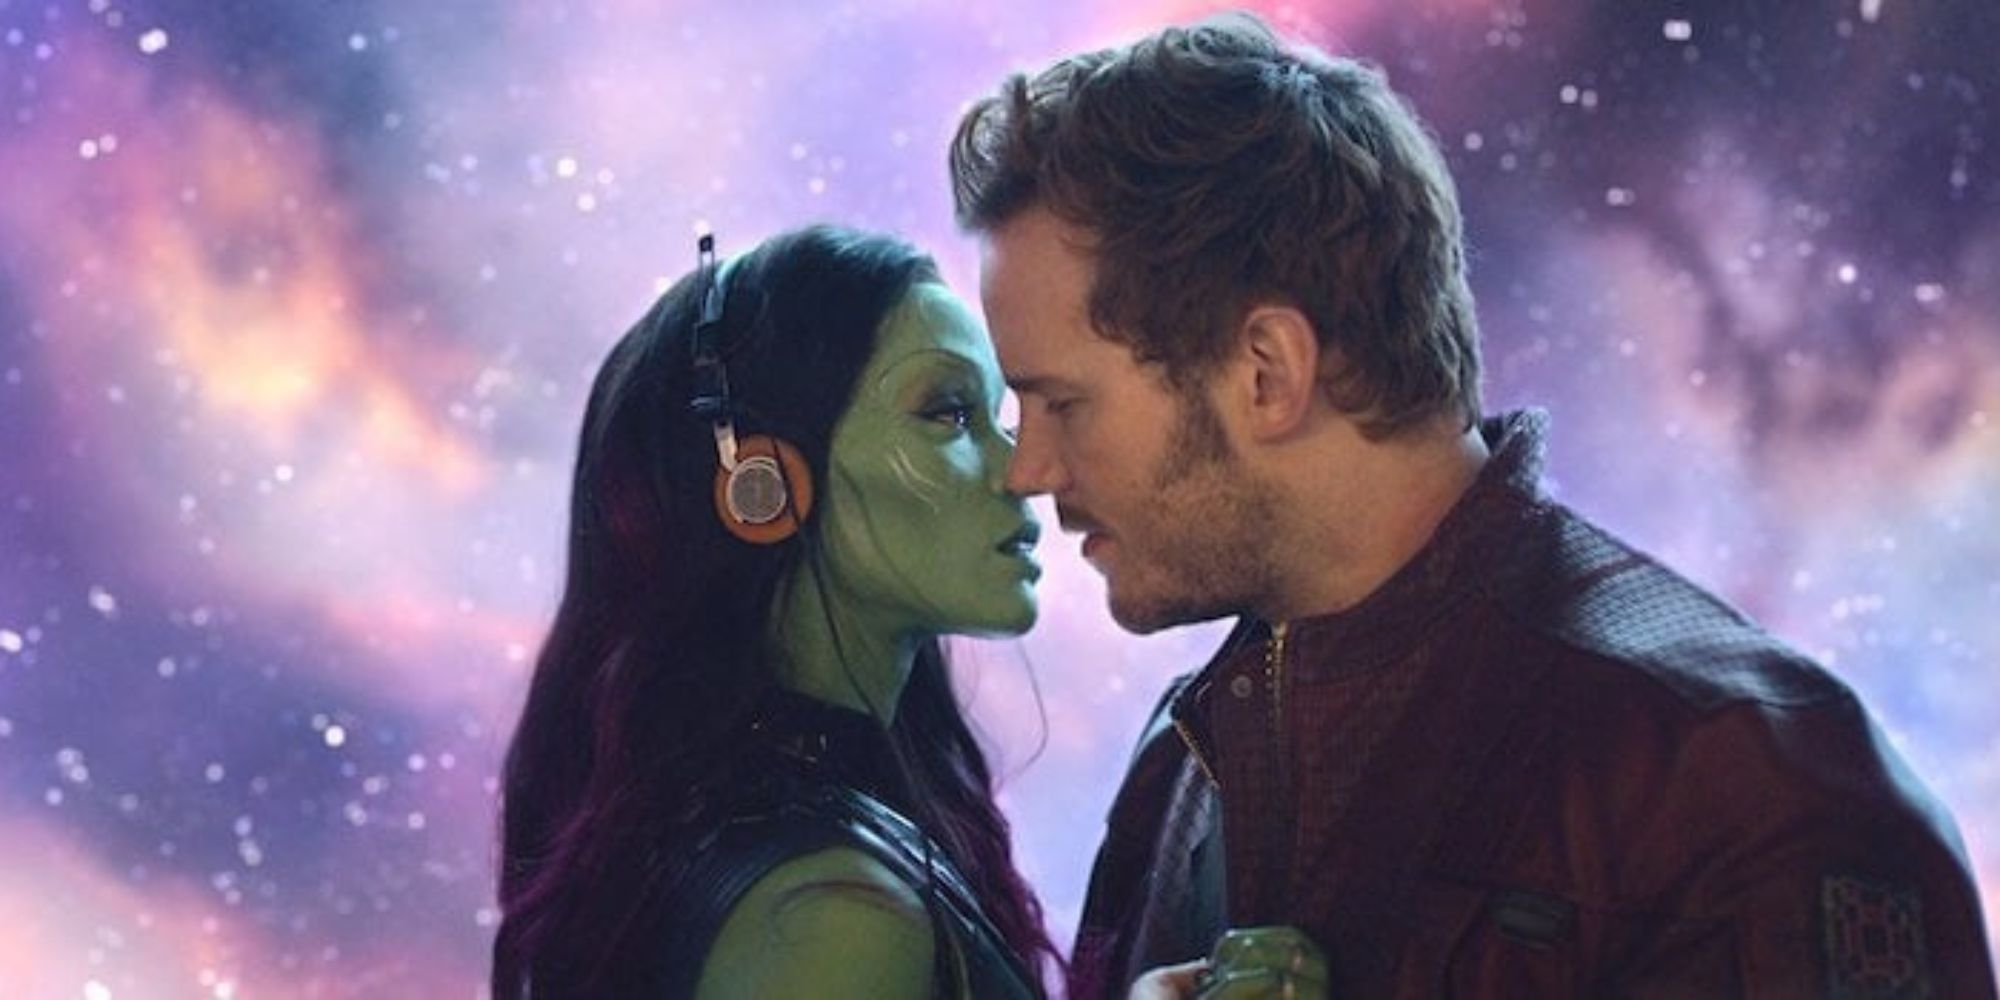 Peter Quill and Gamora in Avengers: Infinity War